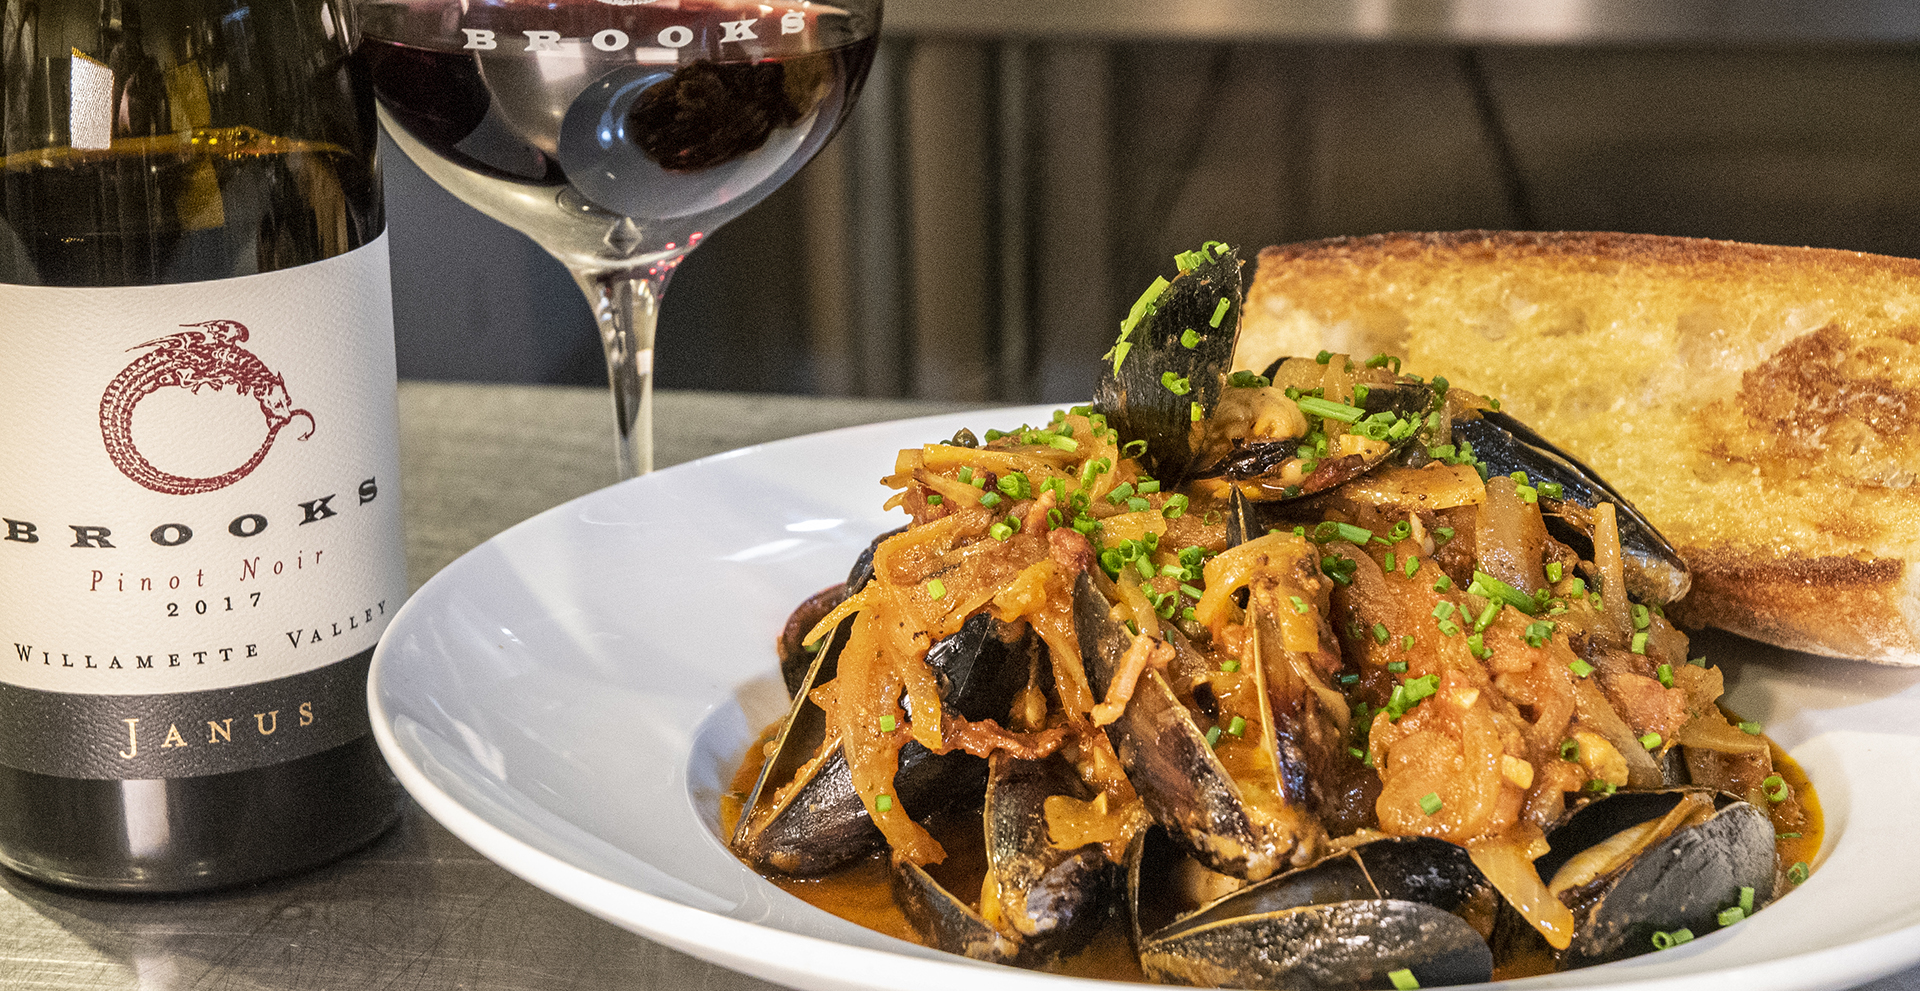 Mussels with spiced tomato coulis & garlic toast